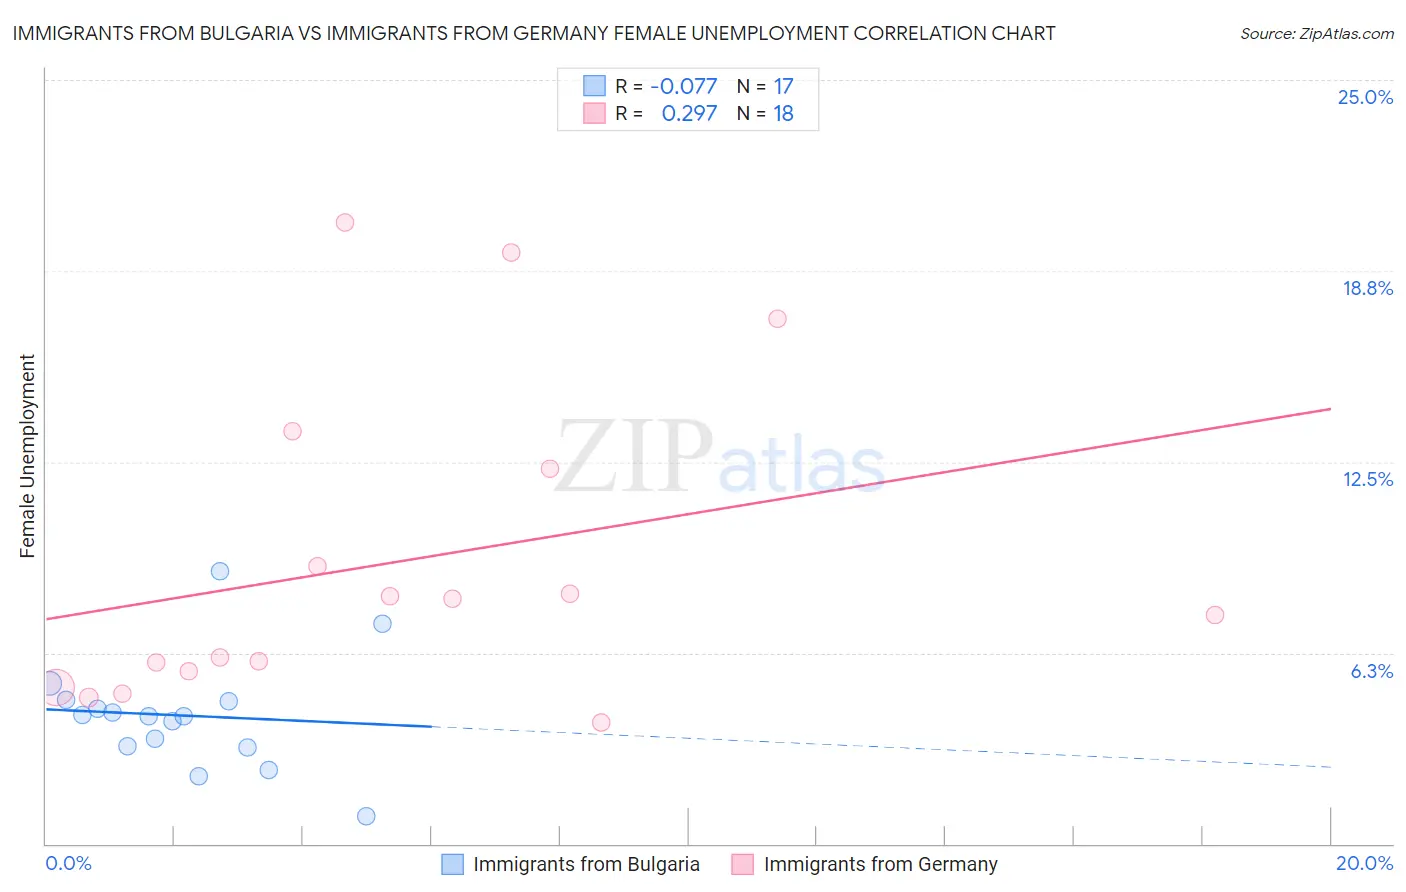 Immigrants from Bulgaria vs Immigrants from Germany Female Unemployment